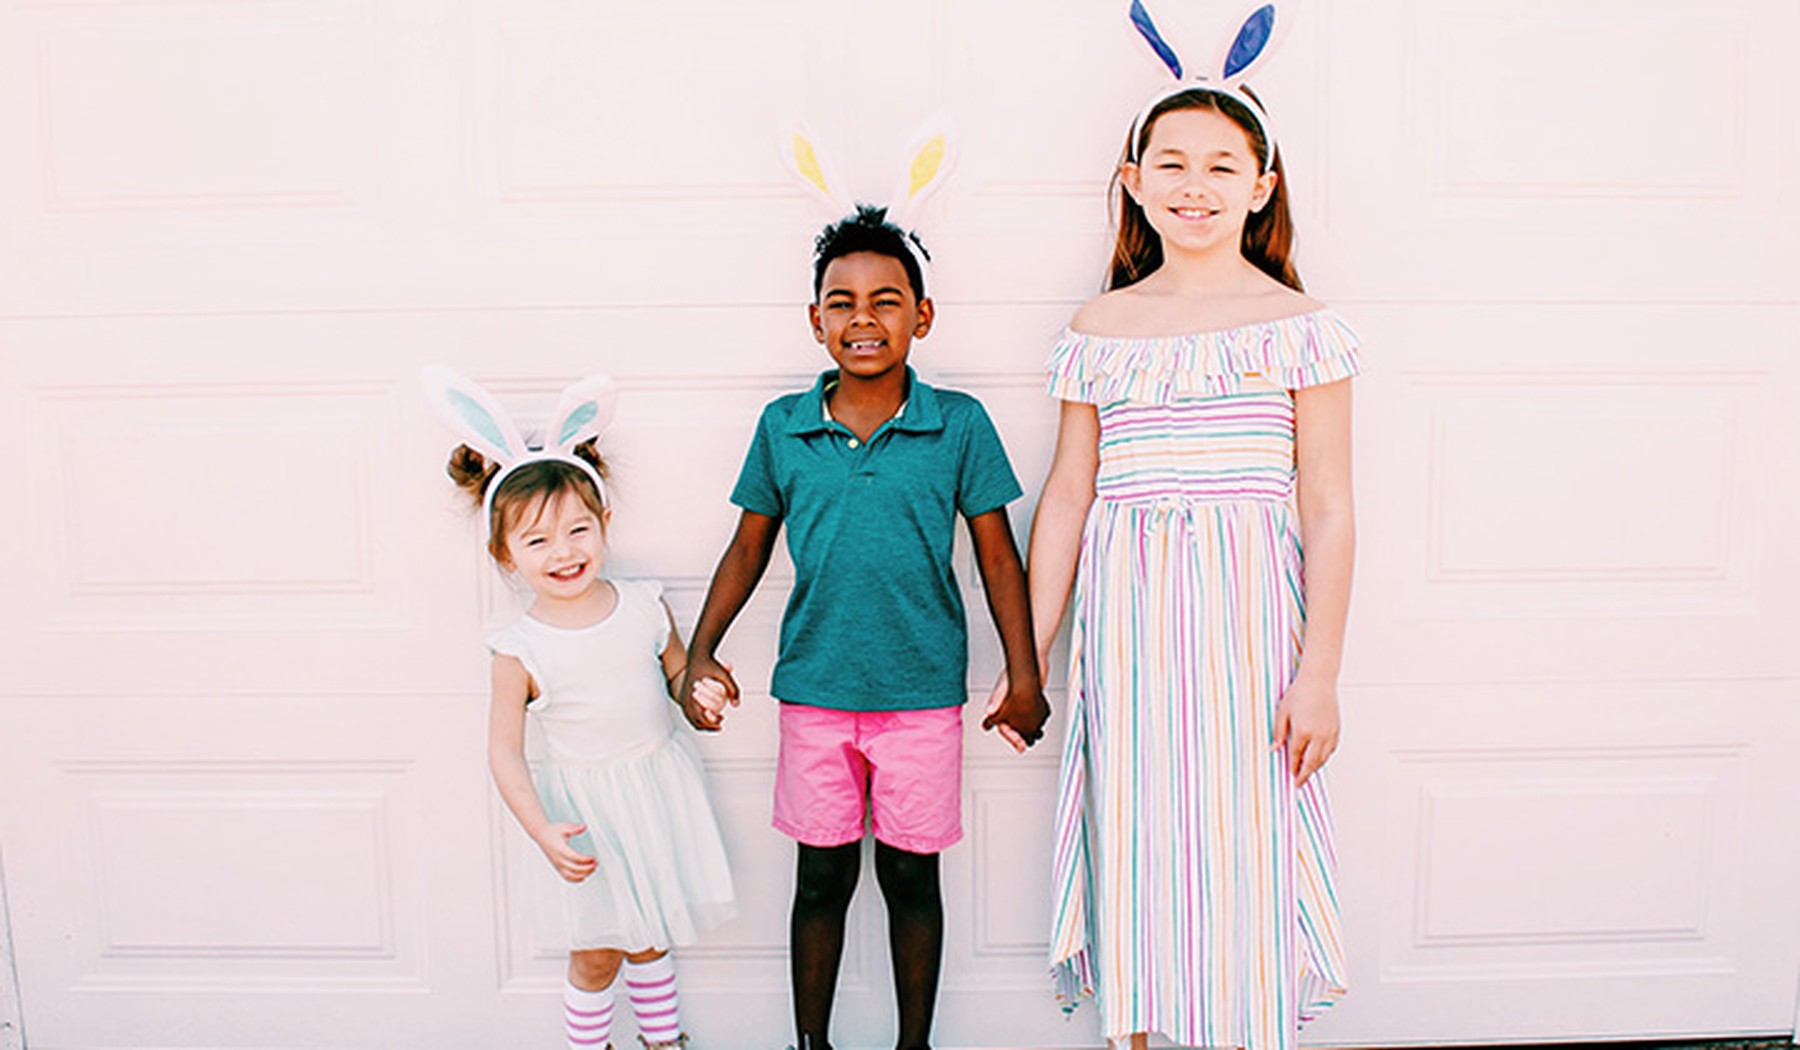 Kids Holding Hands in Easter Outfits